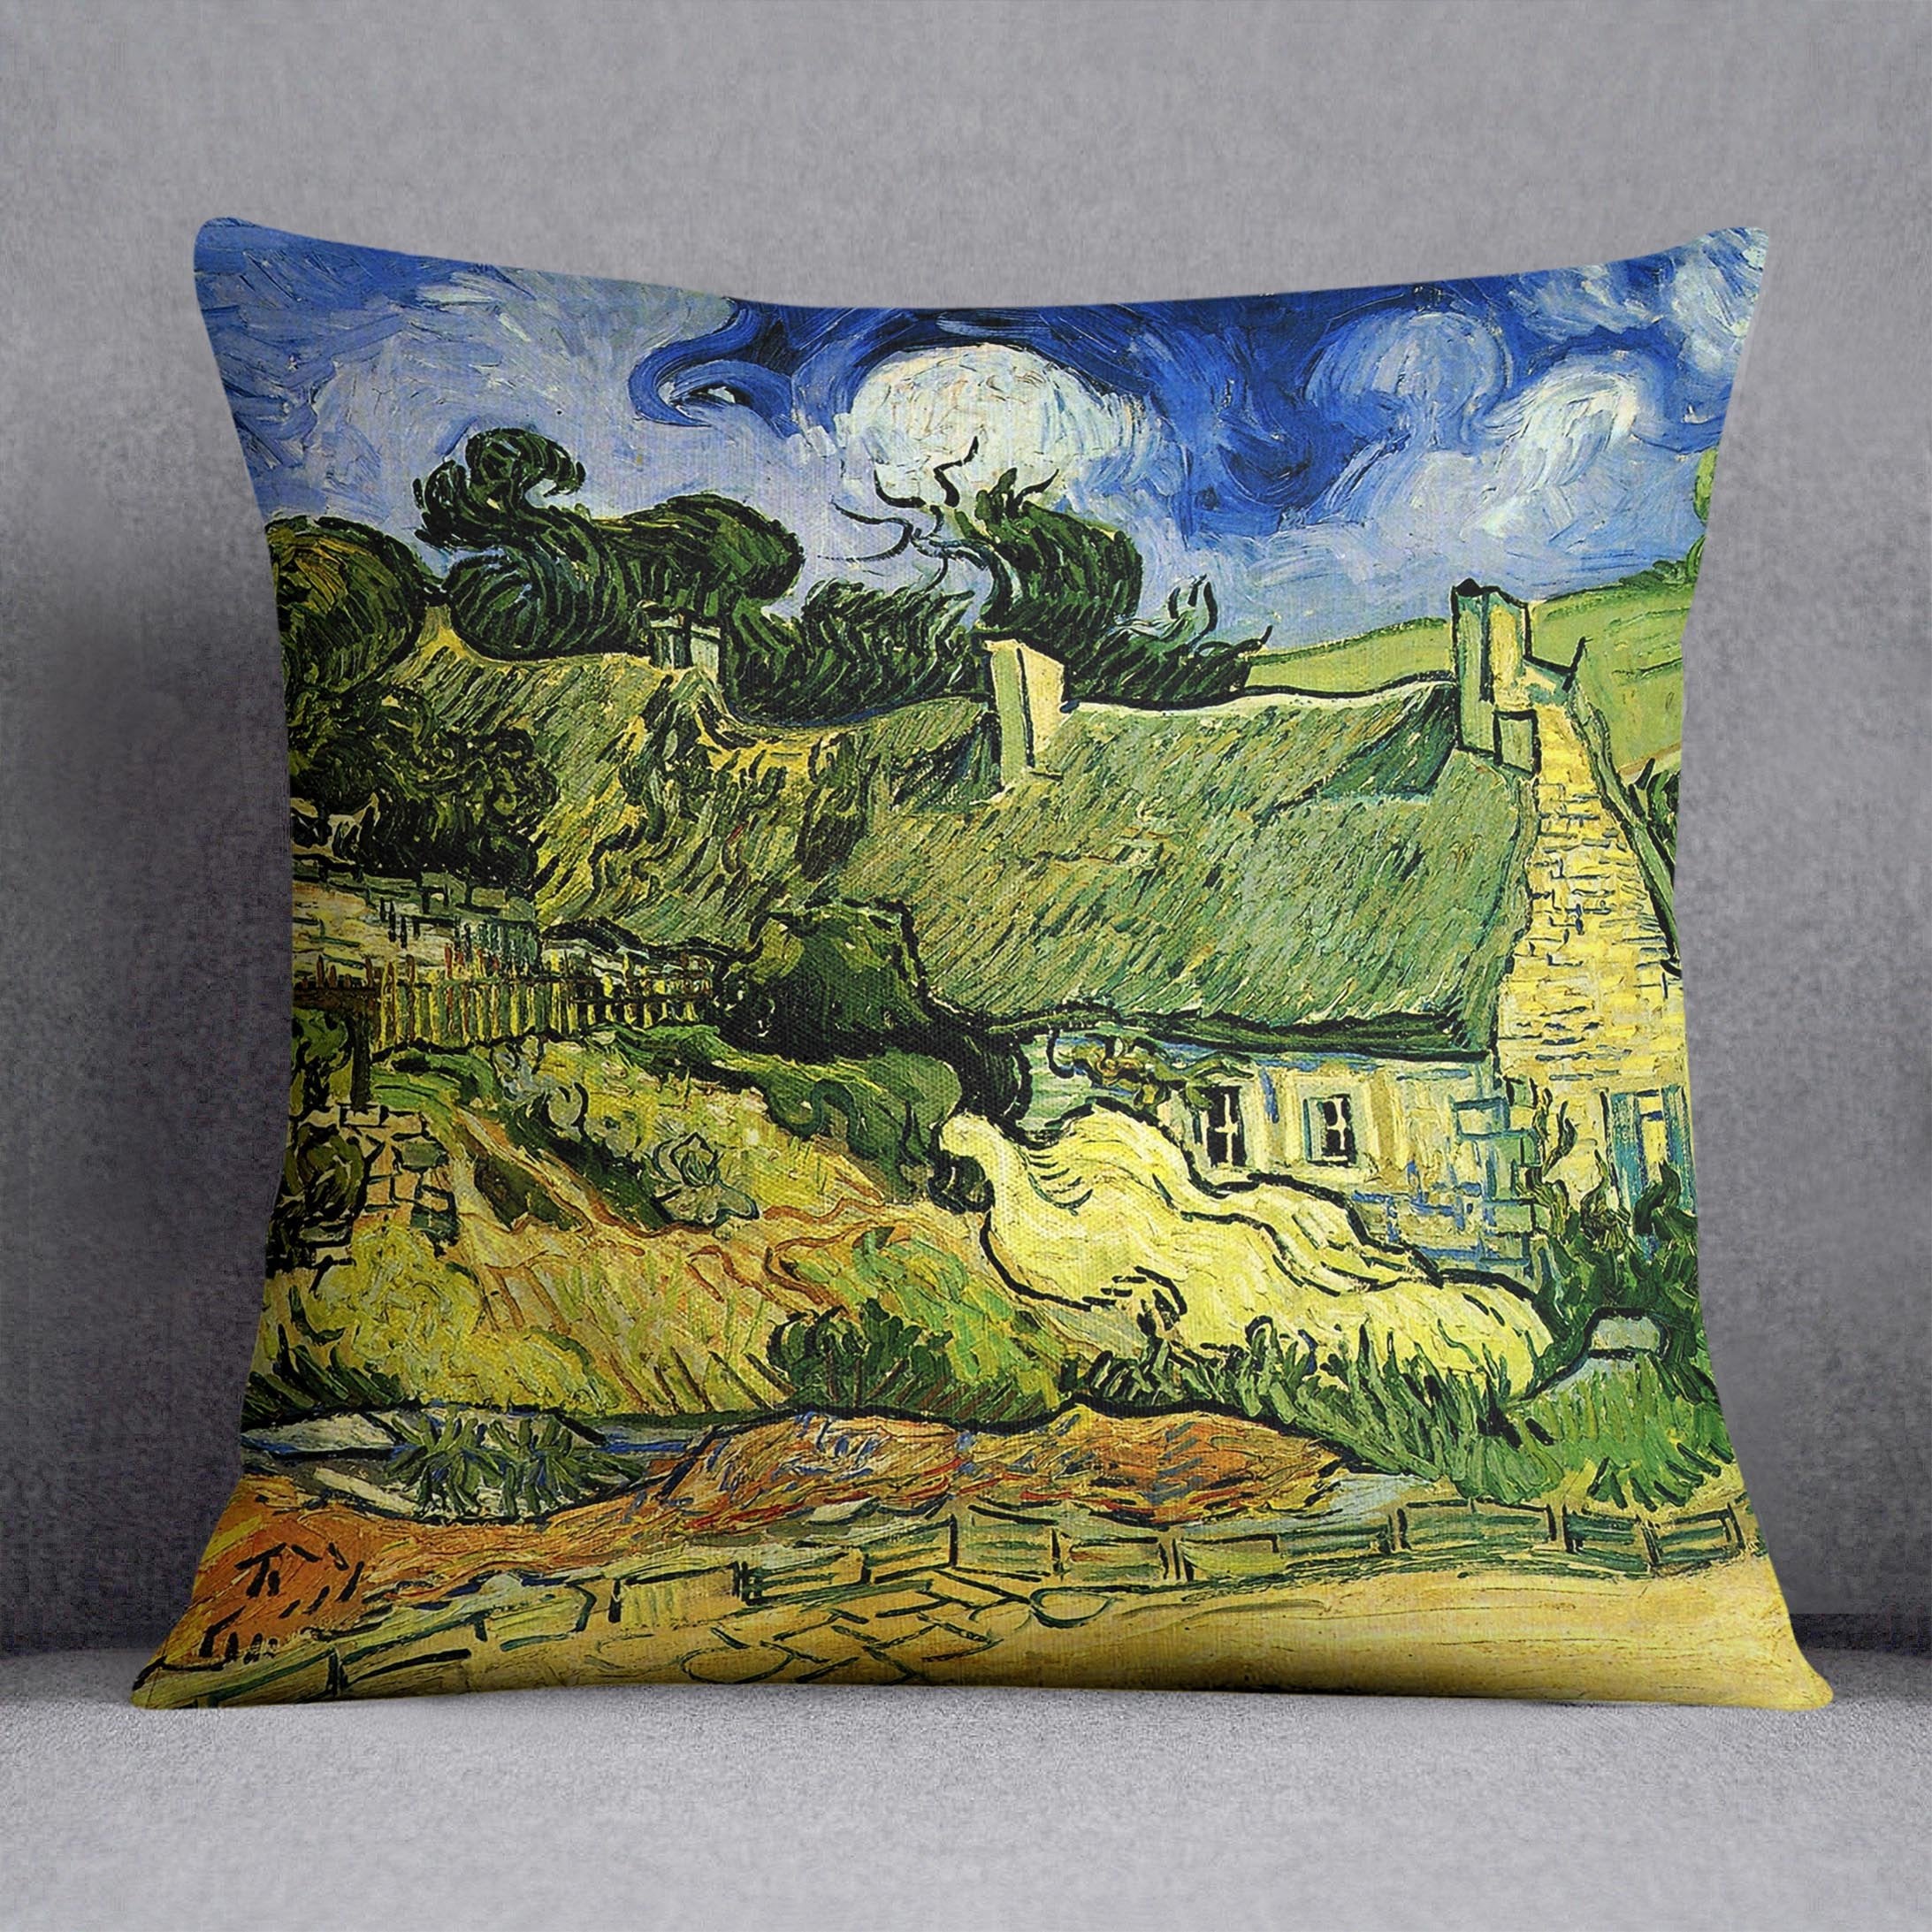 Thatched Cottages at Cordeville by Van Gogh Throw Pillow